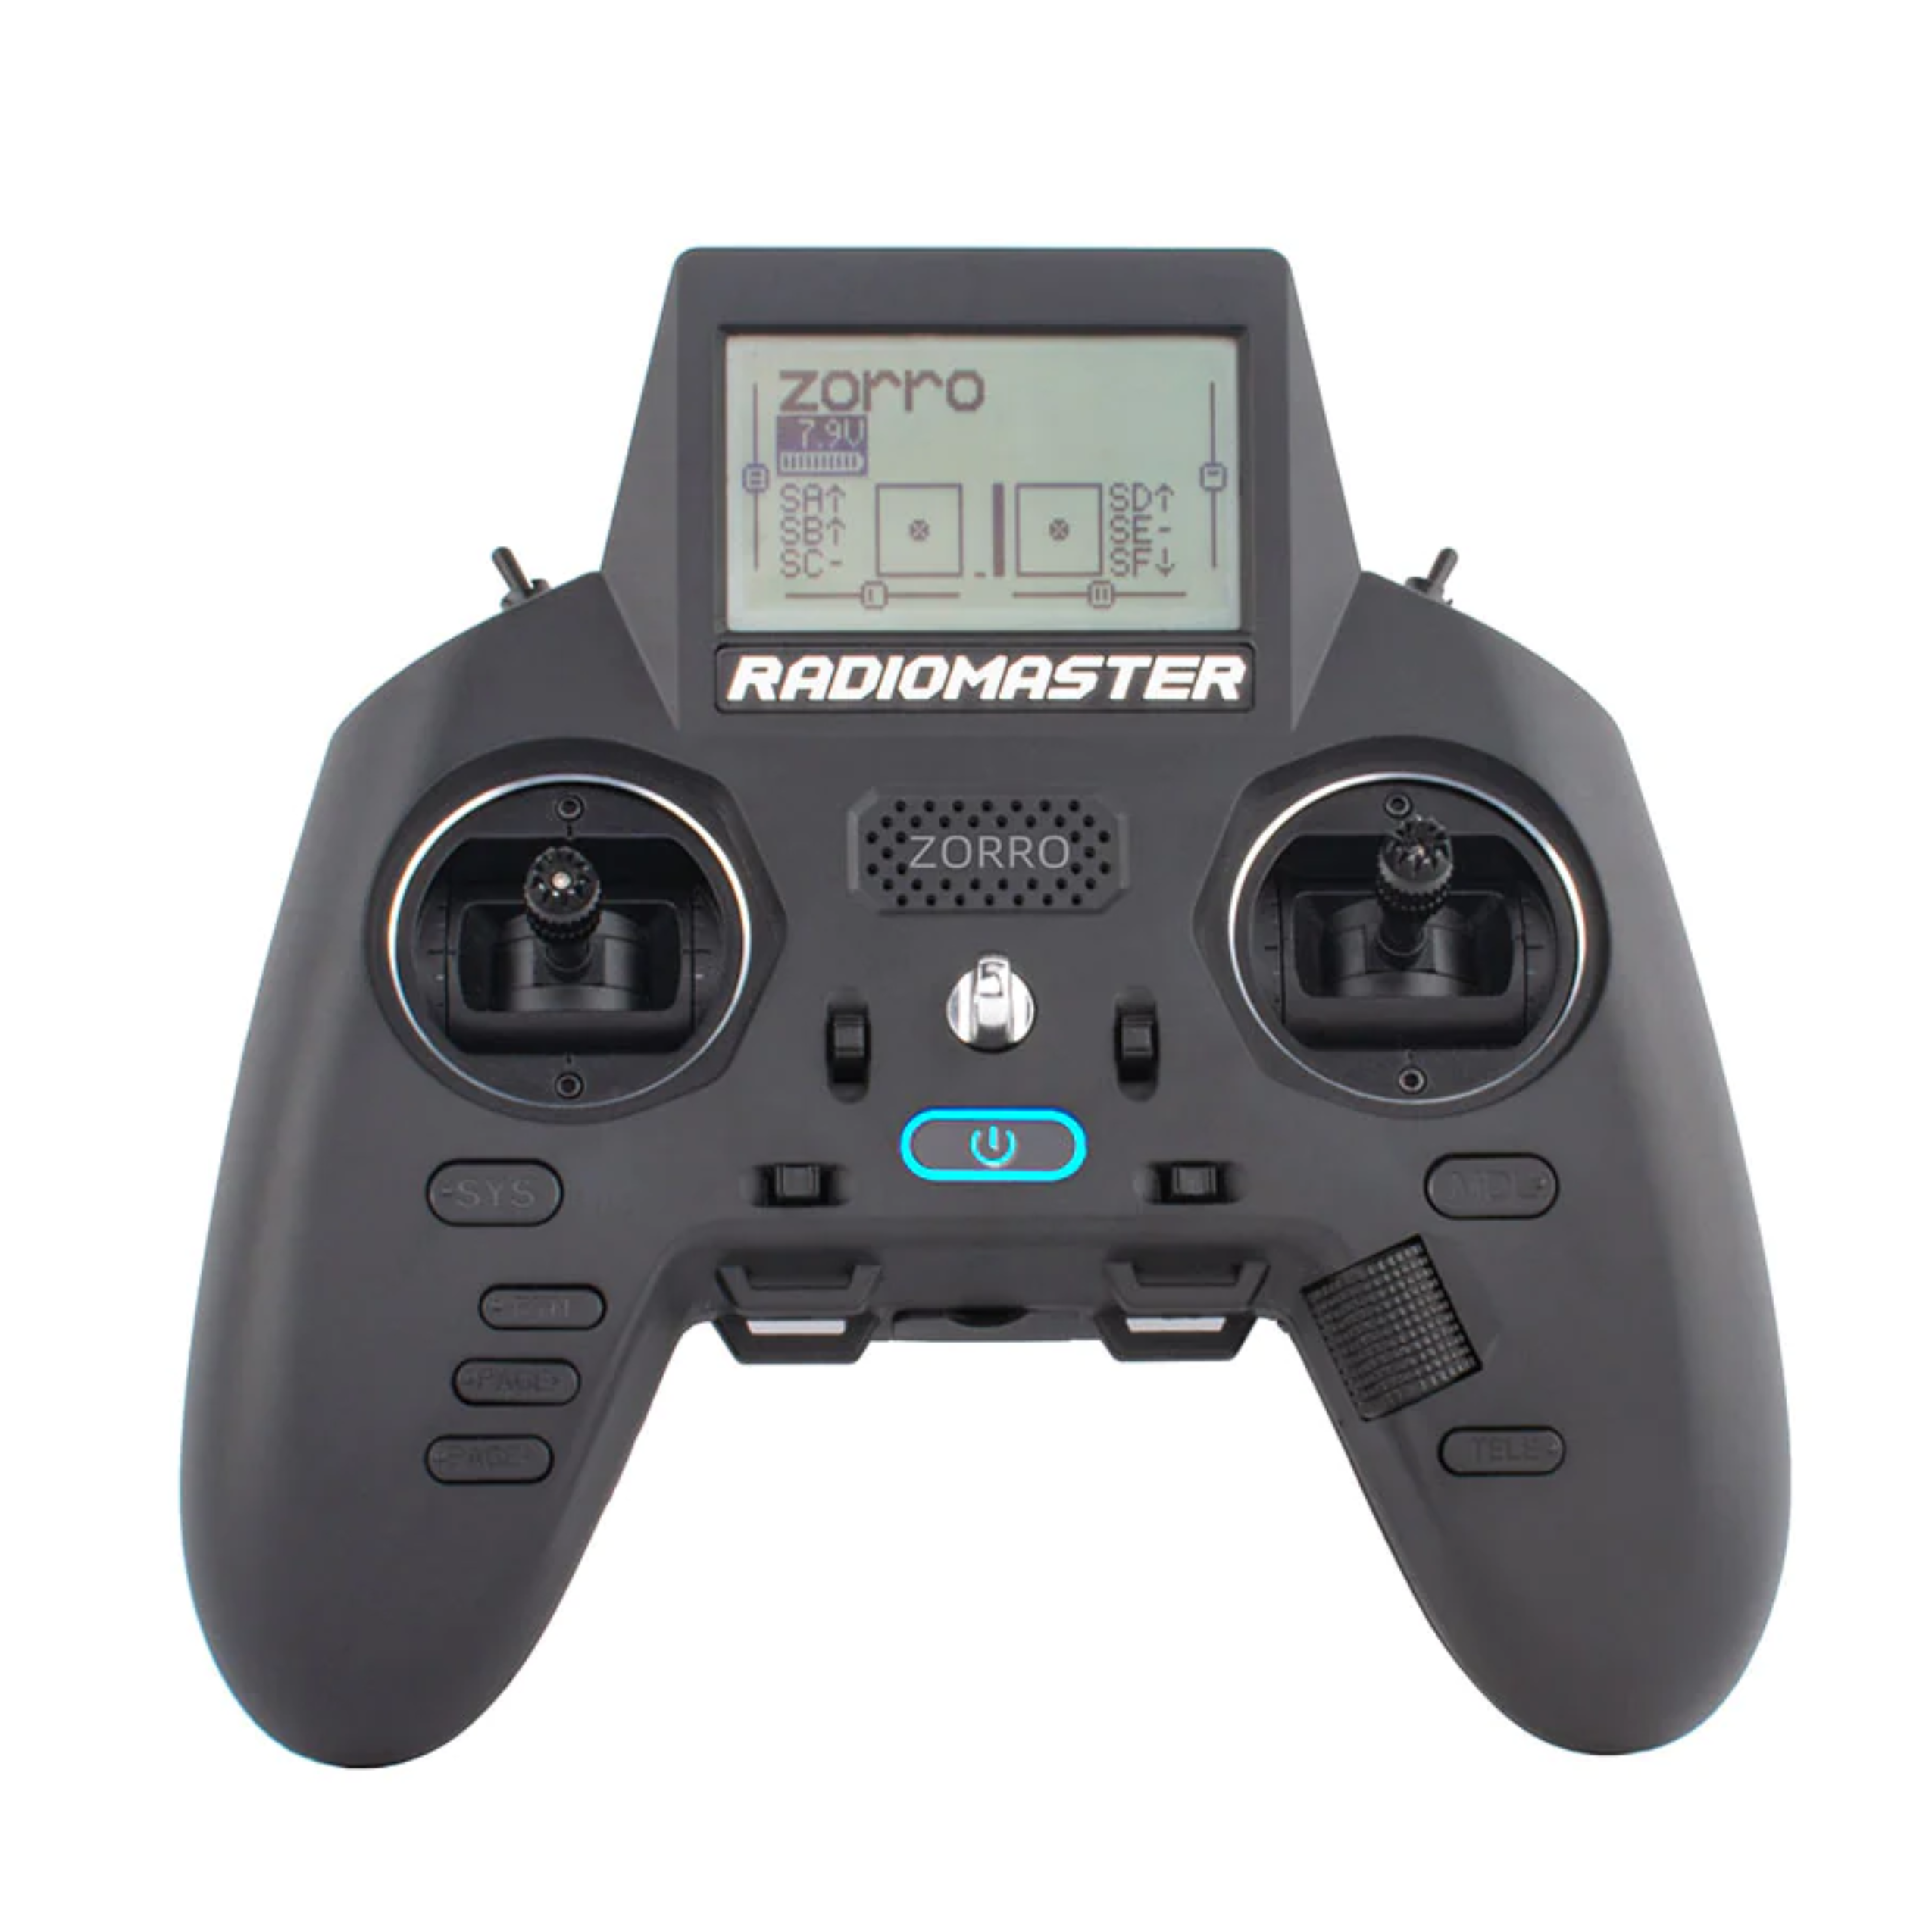 RADIOMASTER ZORRO TRANSMITTER (ELRS) WITH BATTERIES - DroneLabs.ca